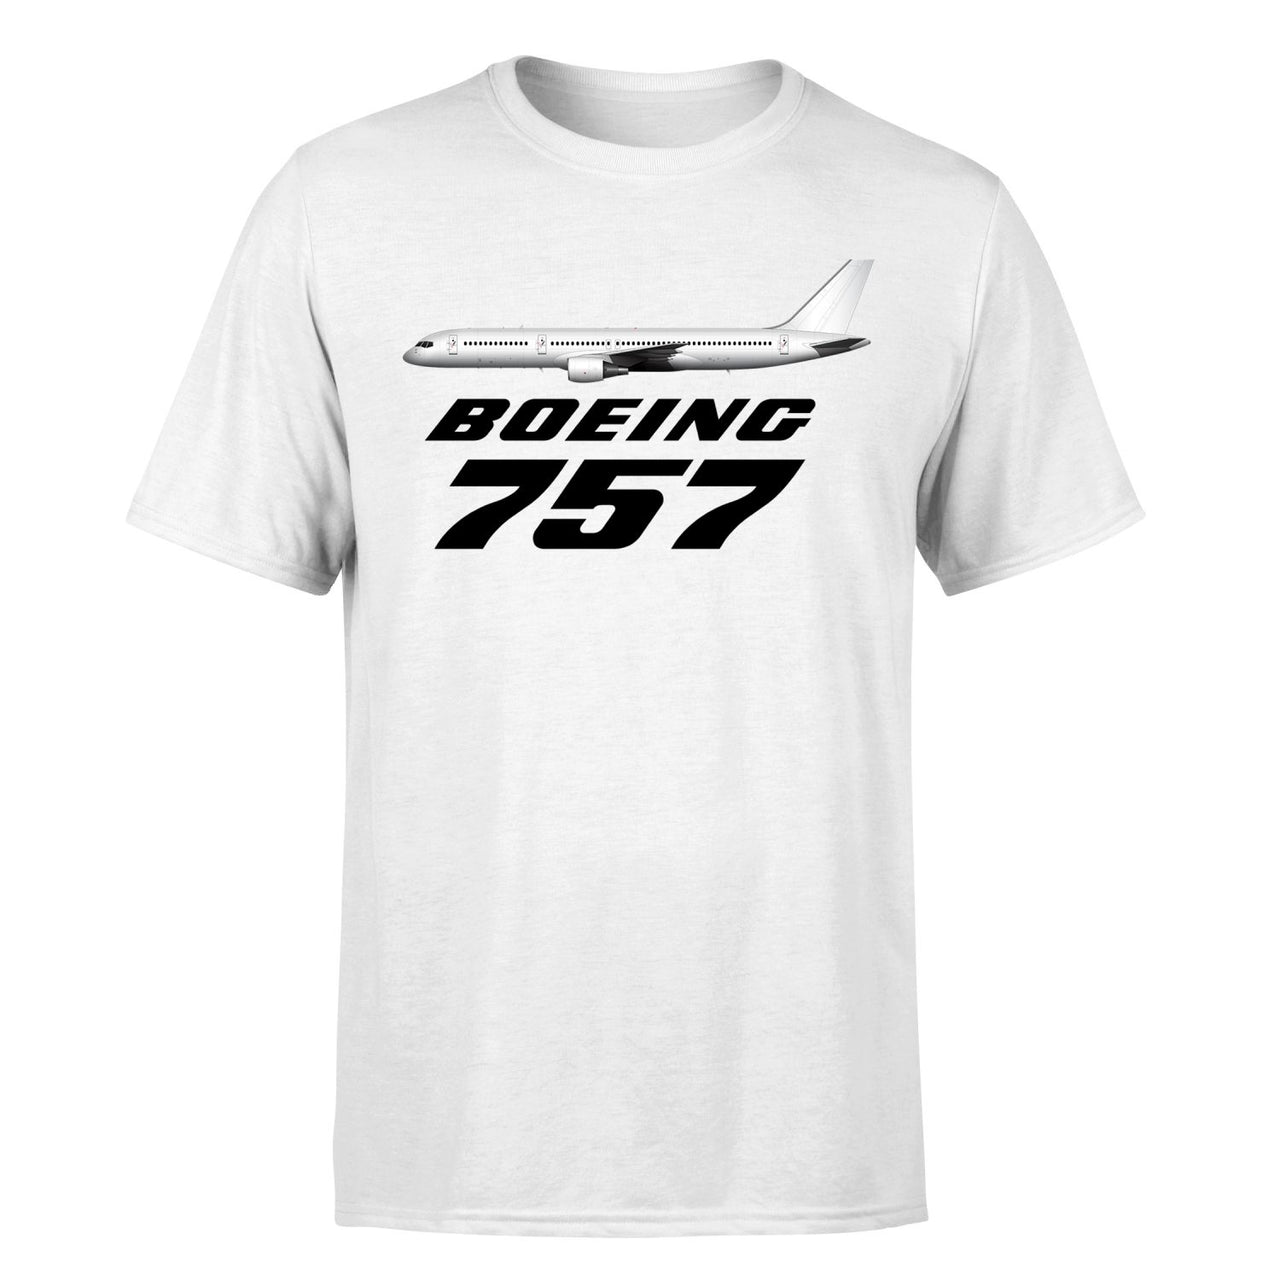 The Boeing 757 Designed T-Shirts